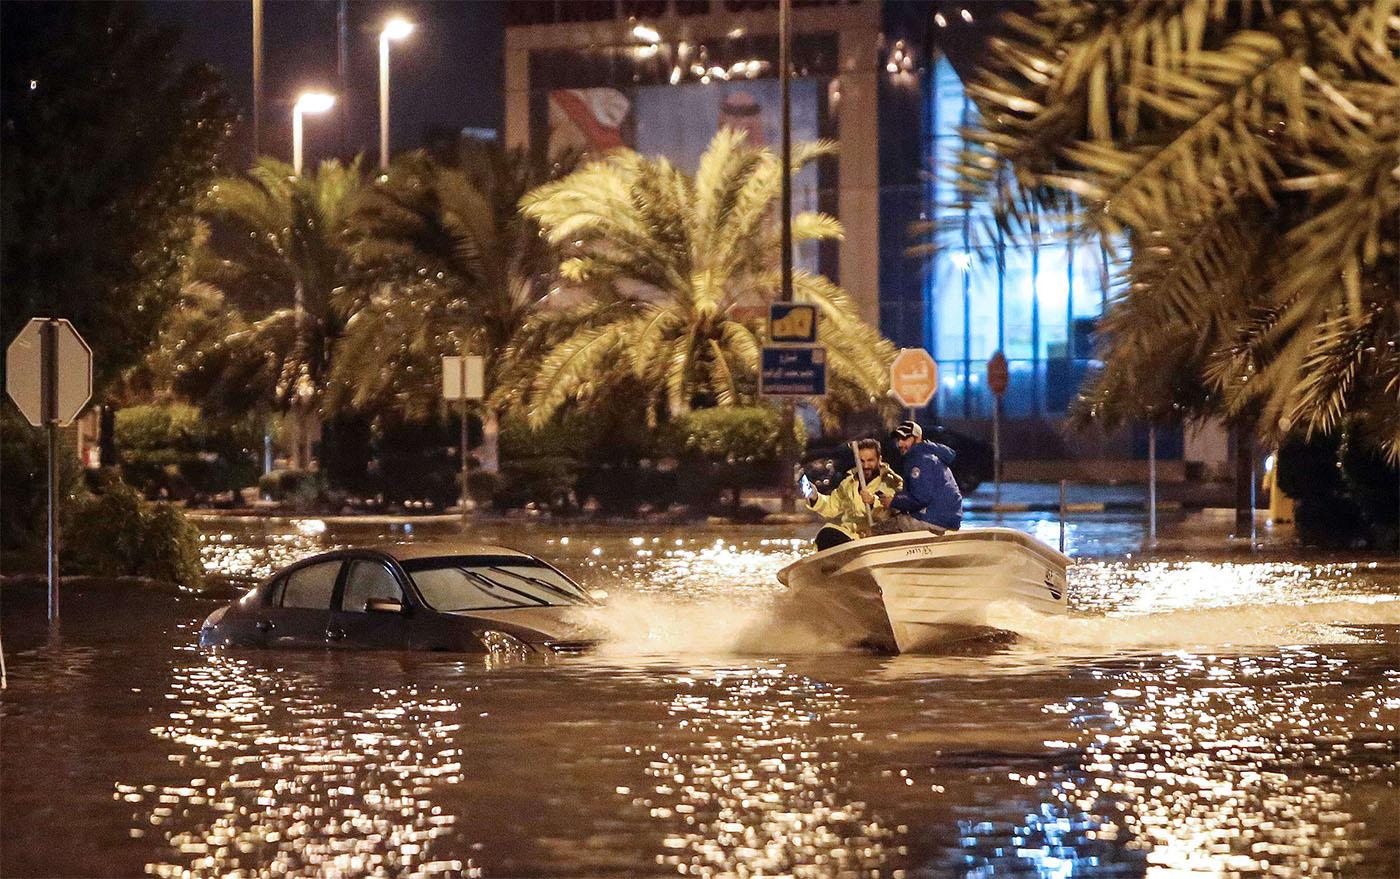 People are using a boat on the flooded main road of the Daeya area of Kuwait city 